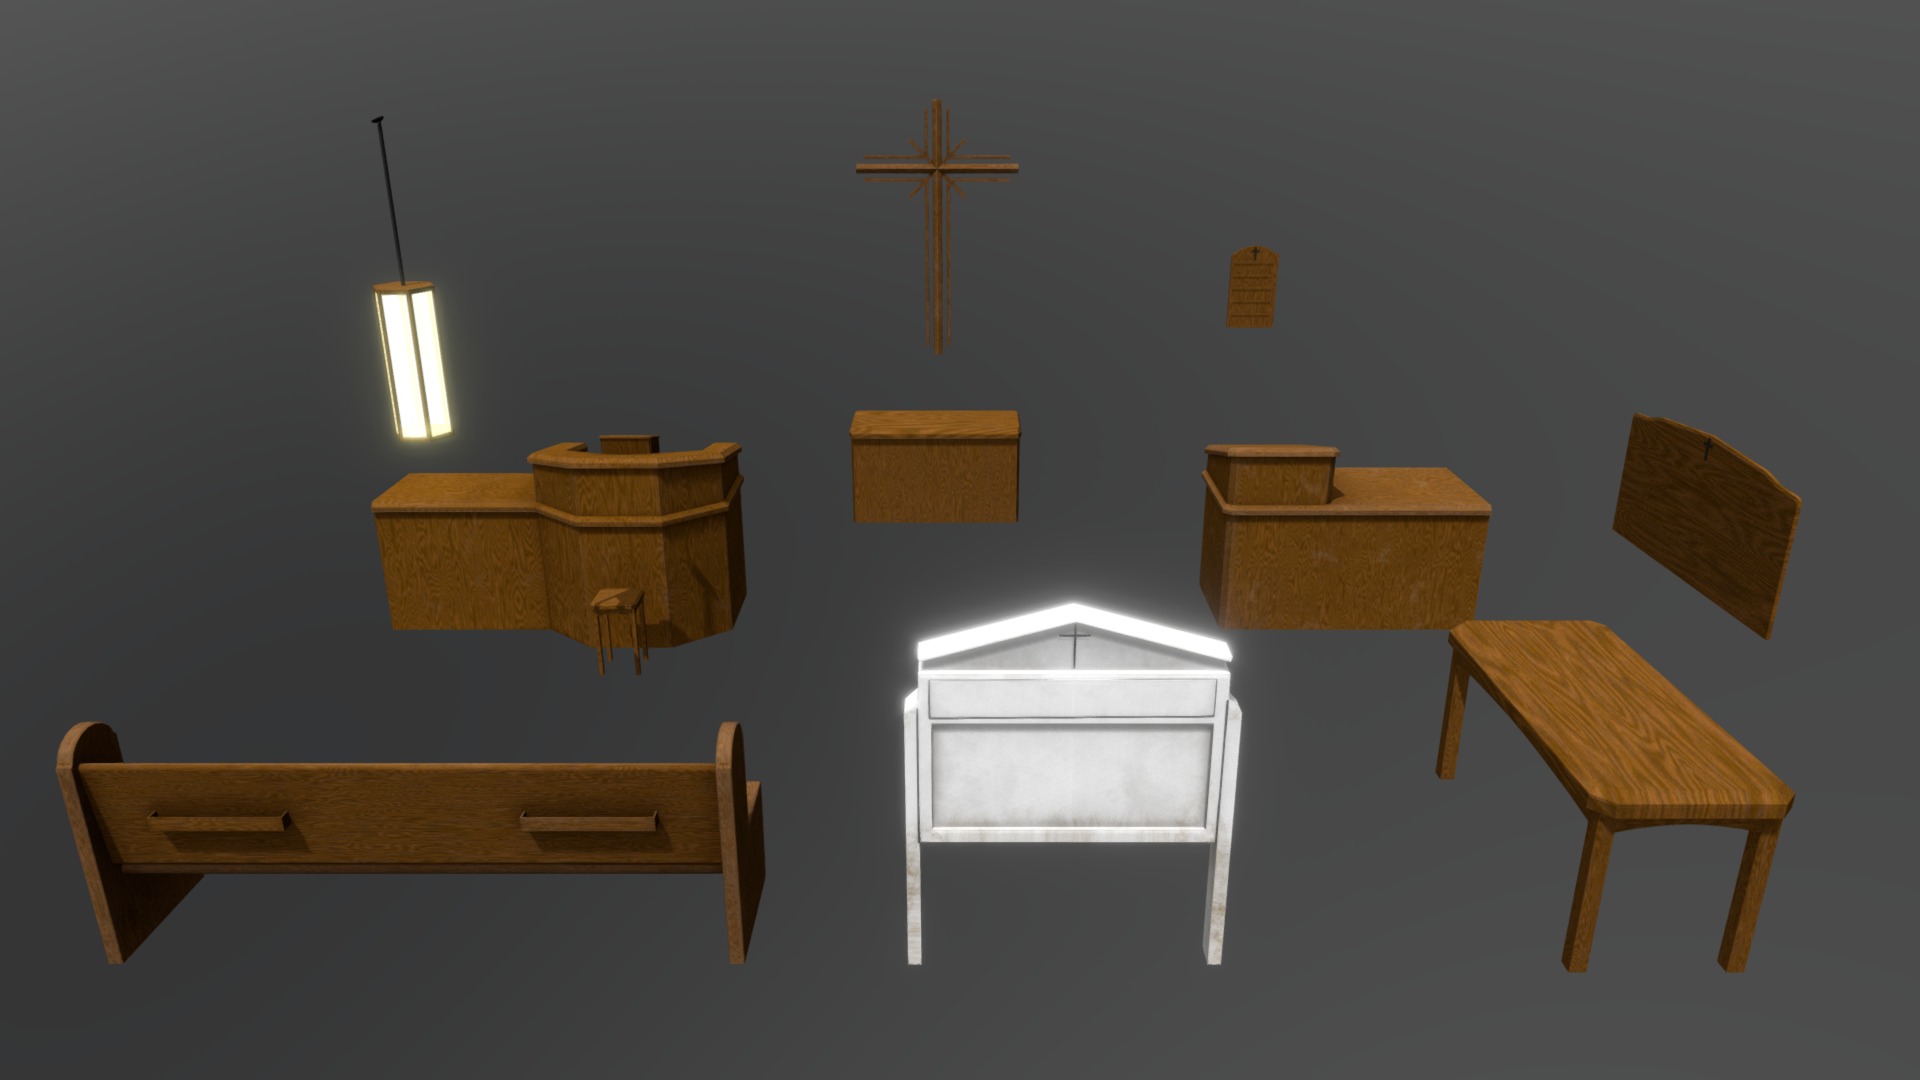 This is a small asset pack that I am currently working on for the inside of a church. The idea for the church is to be a small southern baptist church. so it will be simple in style and its assets. Currently only have the Wodden Items that will be within the church, will continue to add more to it though as I create the items so that these can be dragged and dropped into the scene. The church will have been abondoned for some time, so there will be some weathering on the items.

If you do decide to use this, please credit me. I'd also love to see what you end up using it for! - Church Asset Pack - Download Free 3D model by Caboose3d 3d model